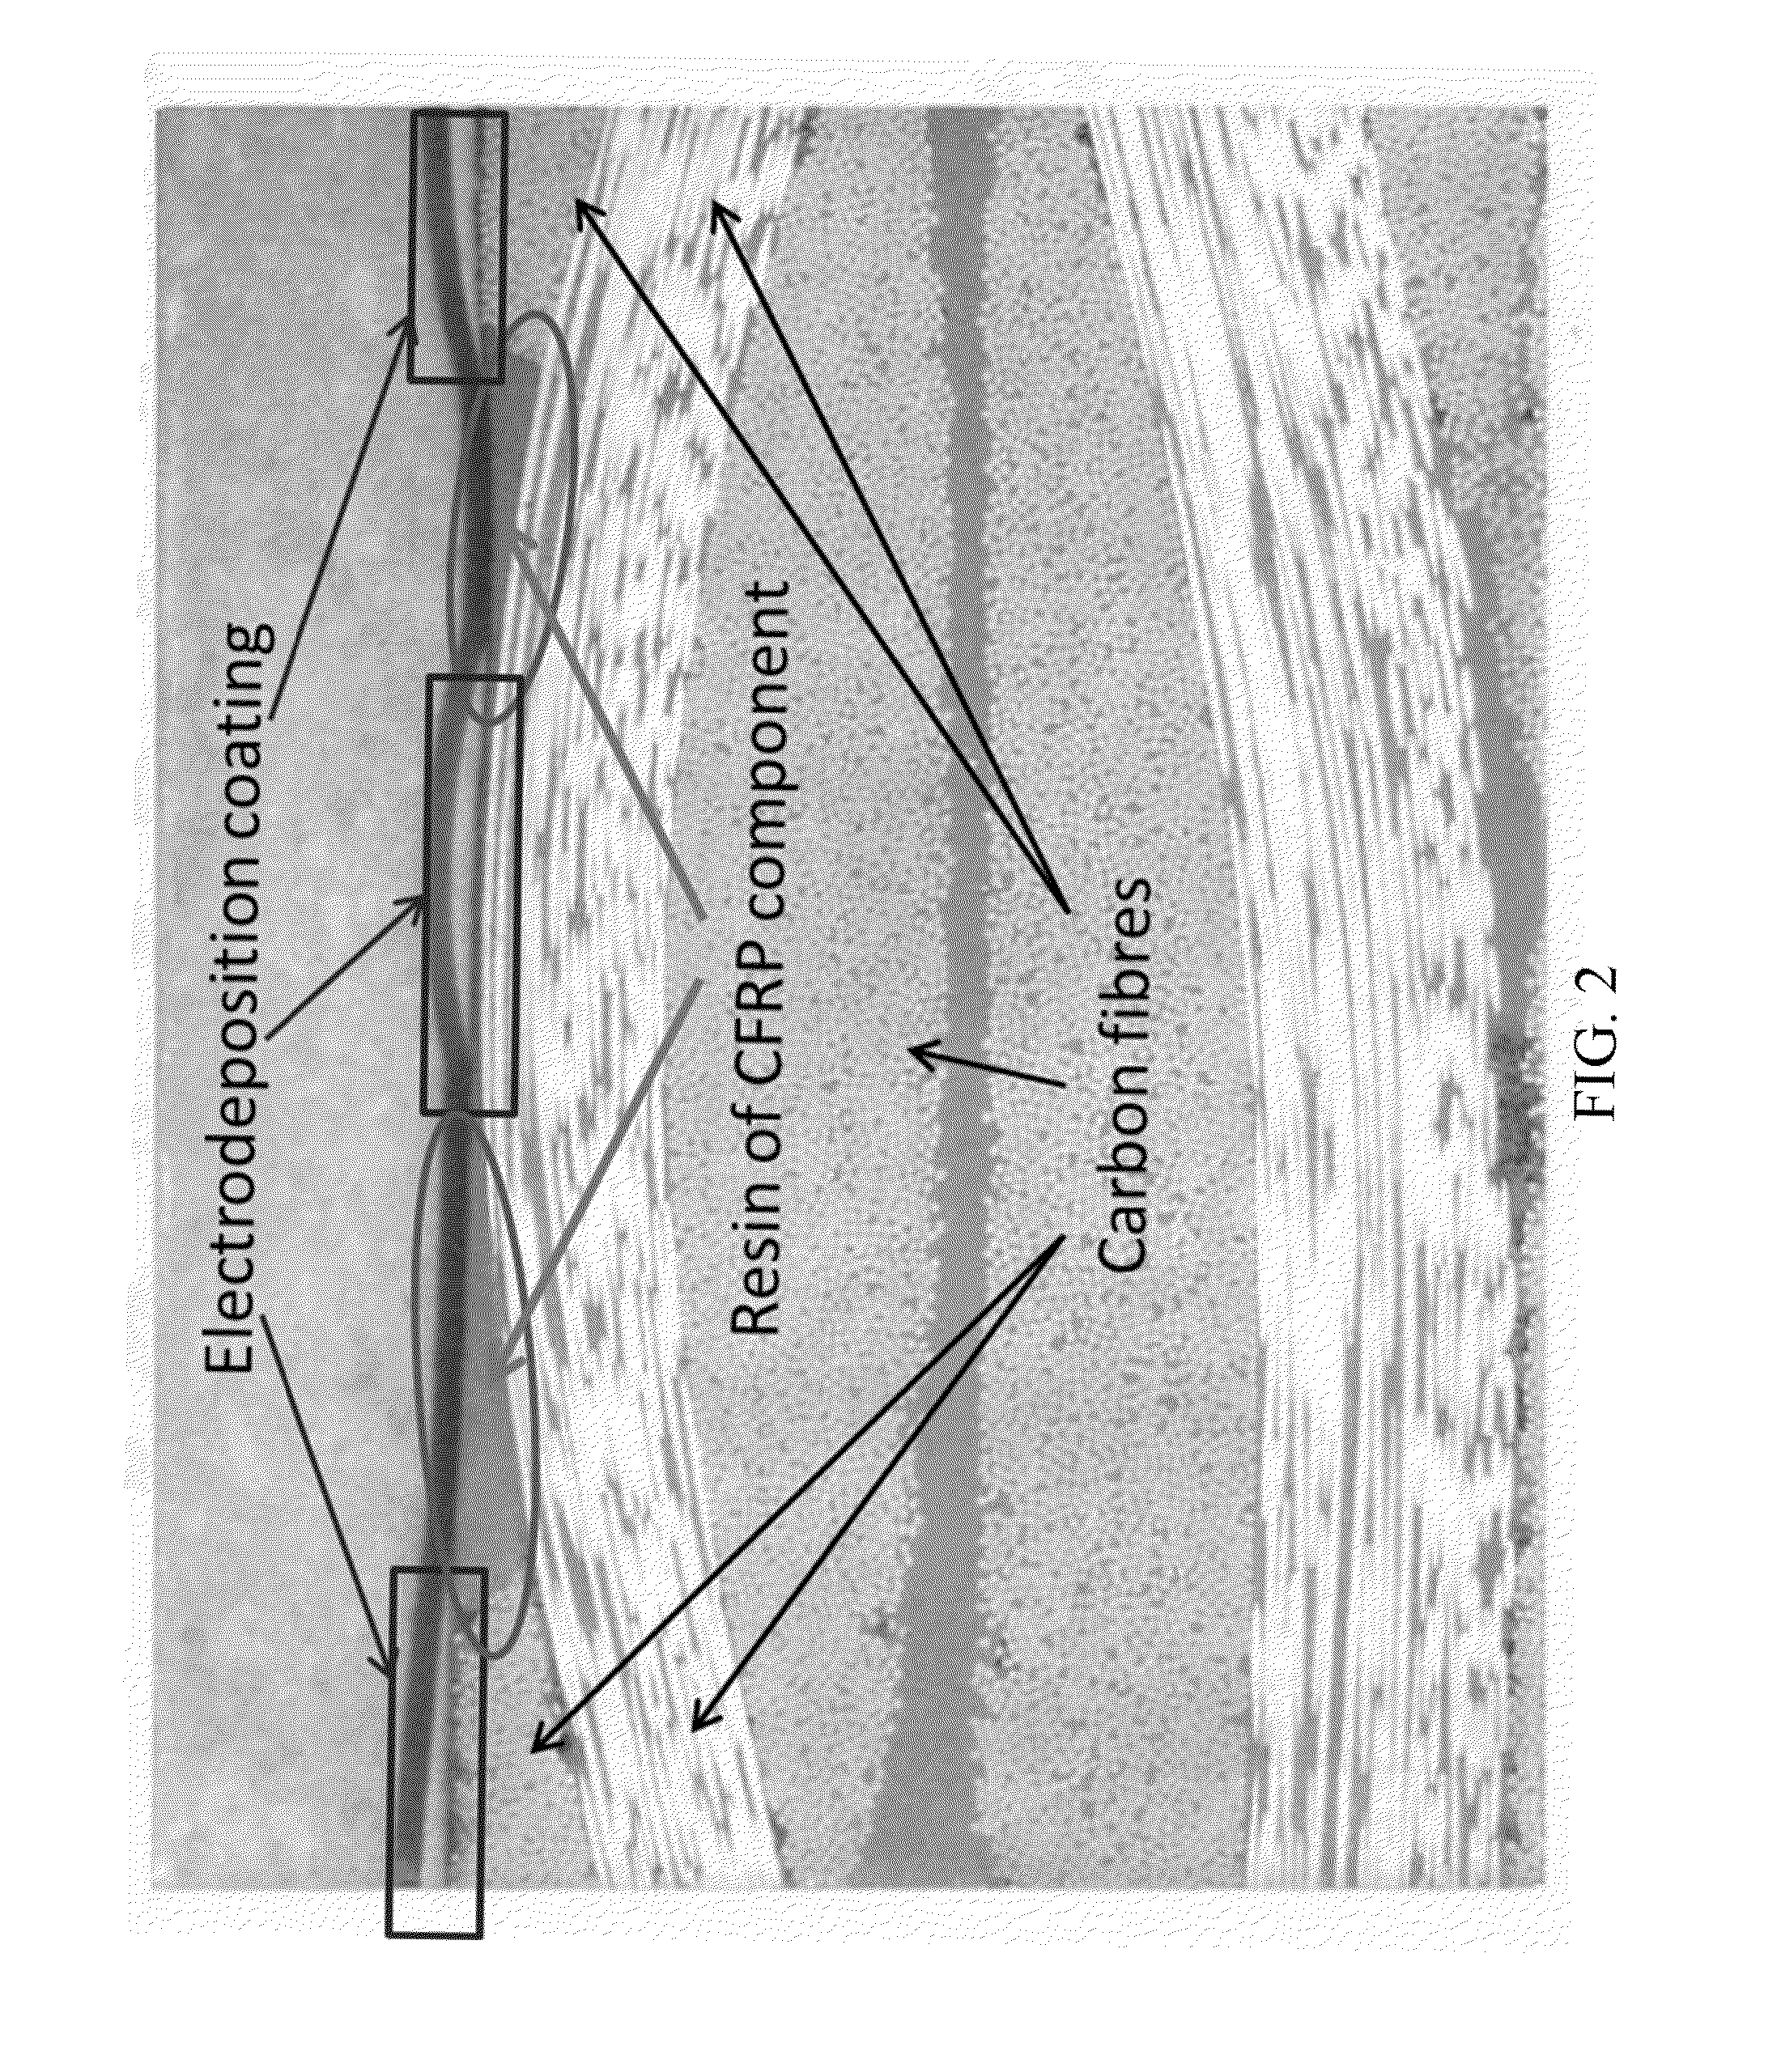 Process for selective isolation of CFRP parts by electrodeposition coatings